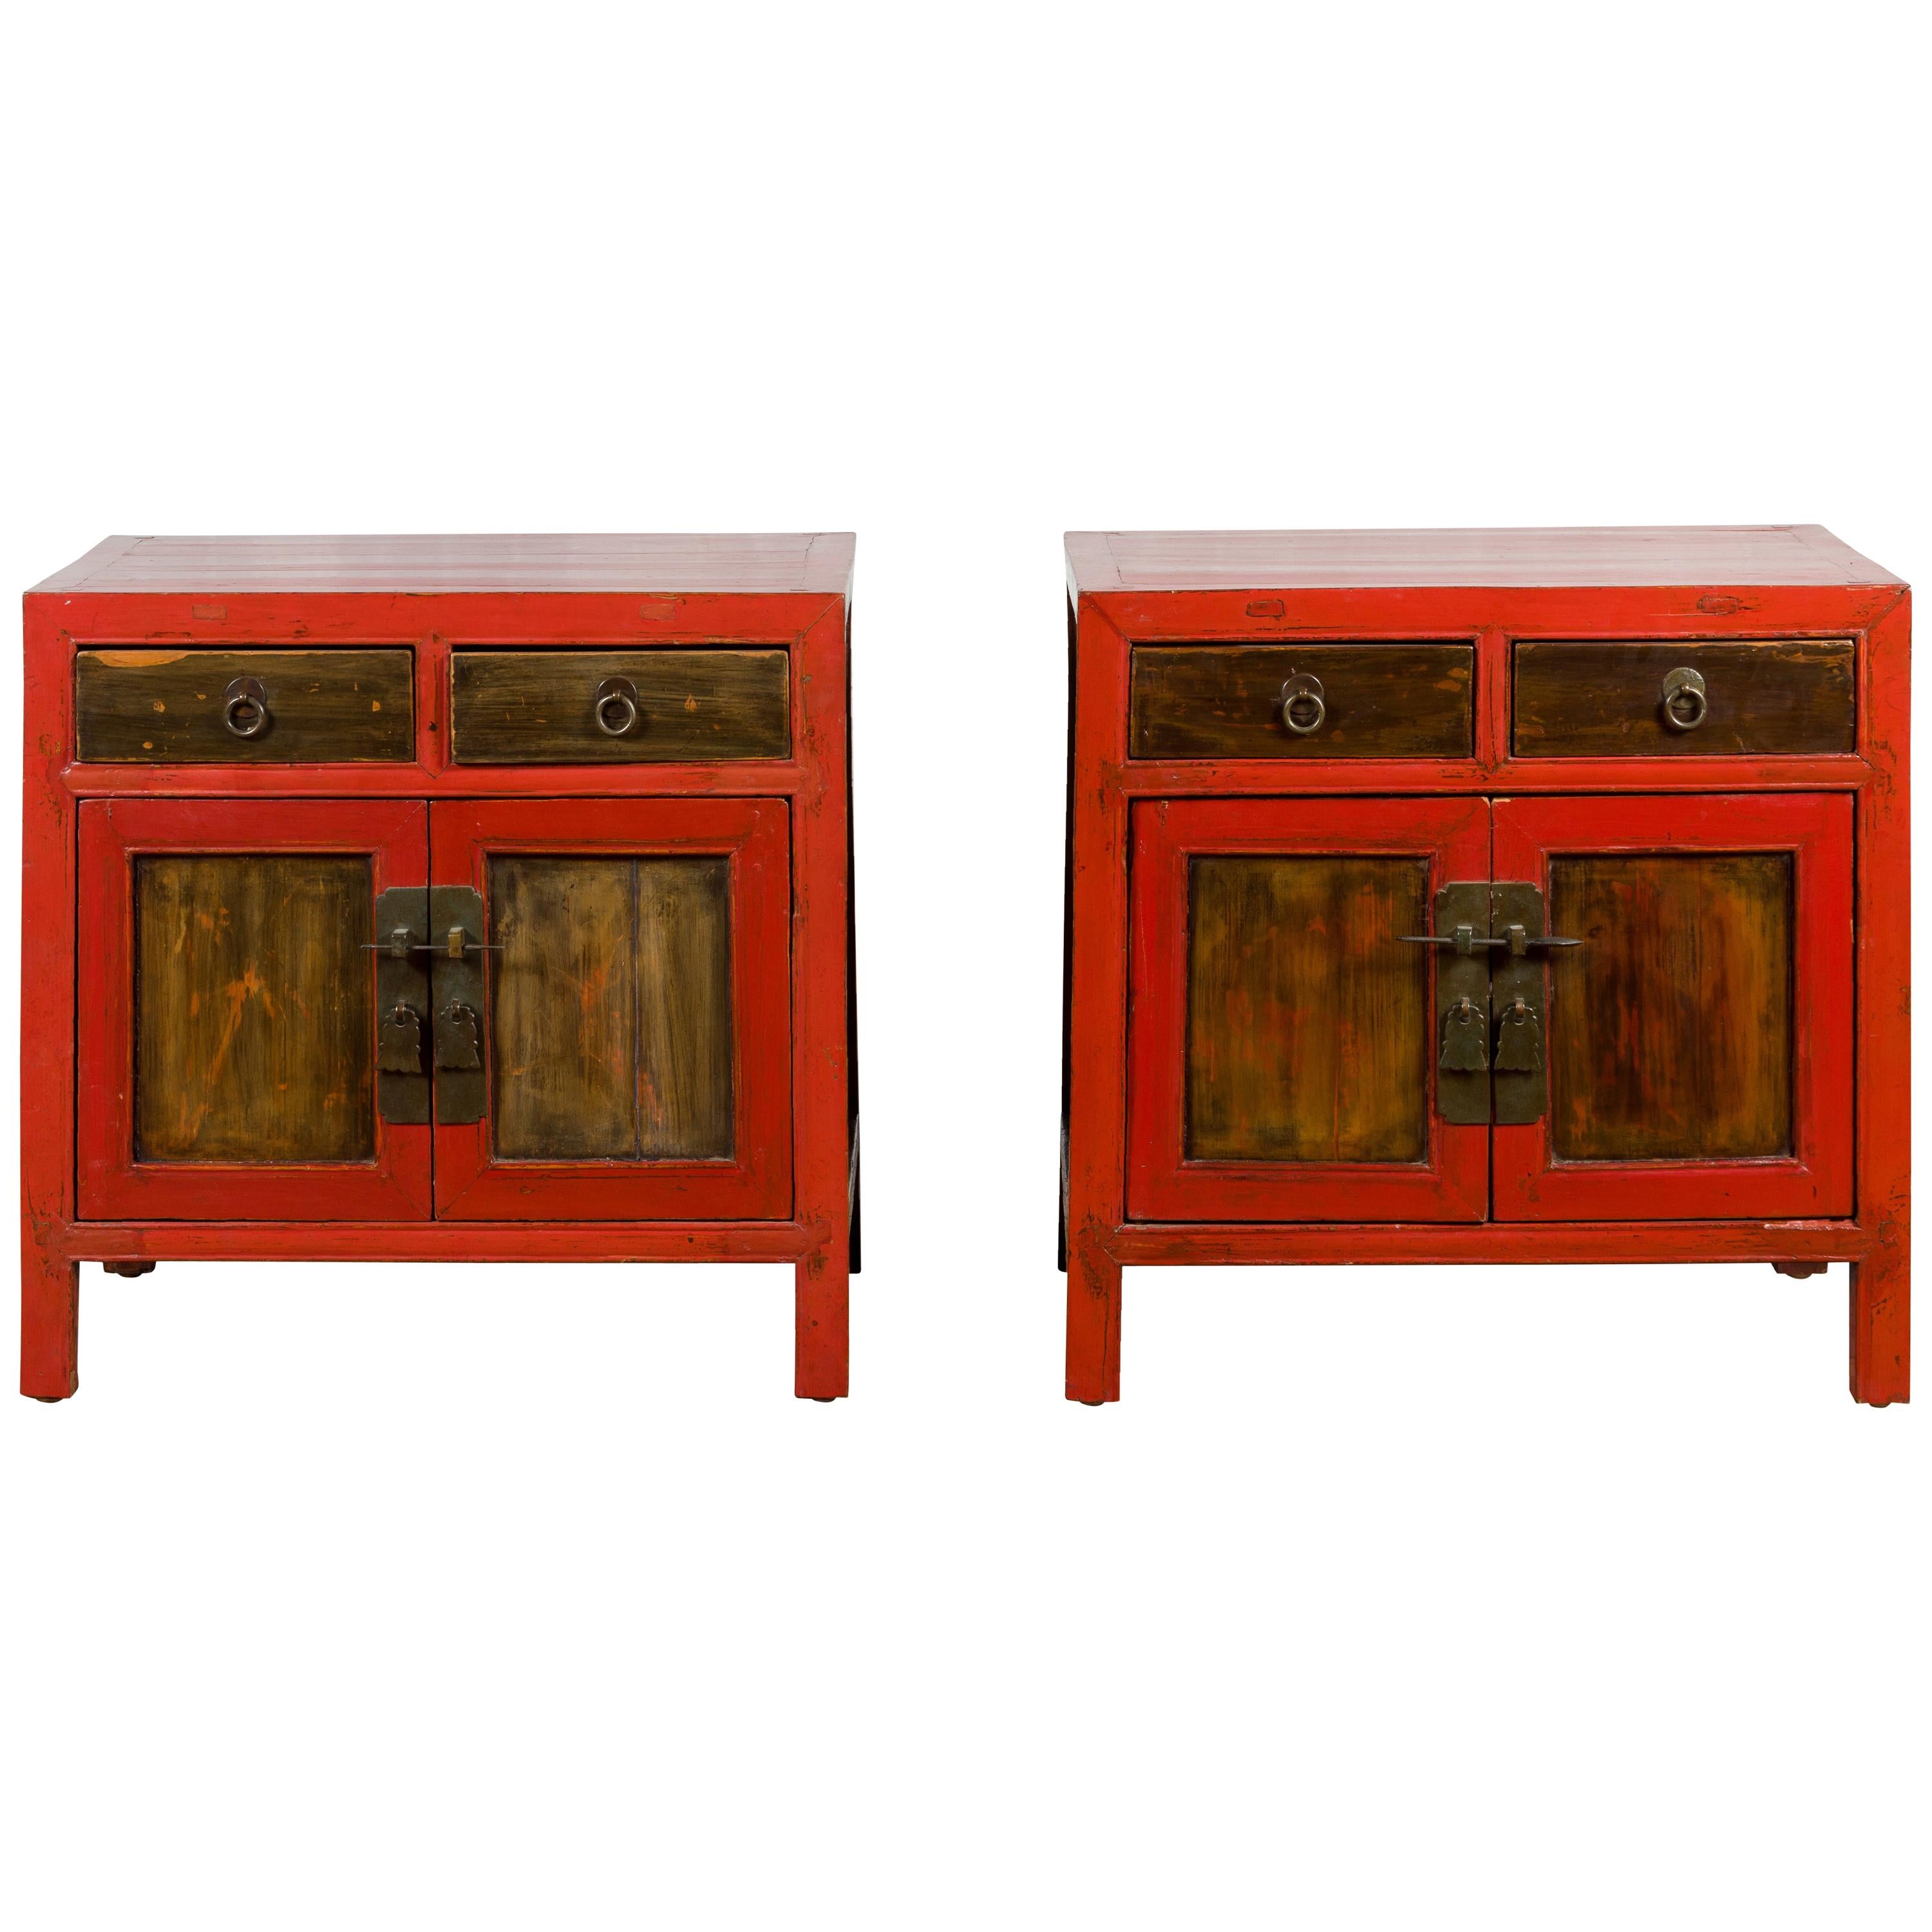 Pair of Chinese Antique Red Lacquer Small Cabinets with Drawers and Doors